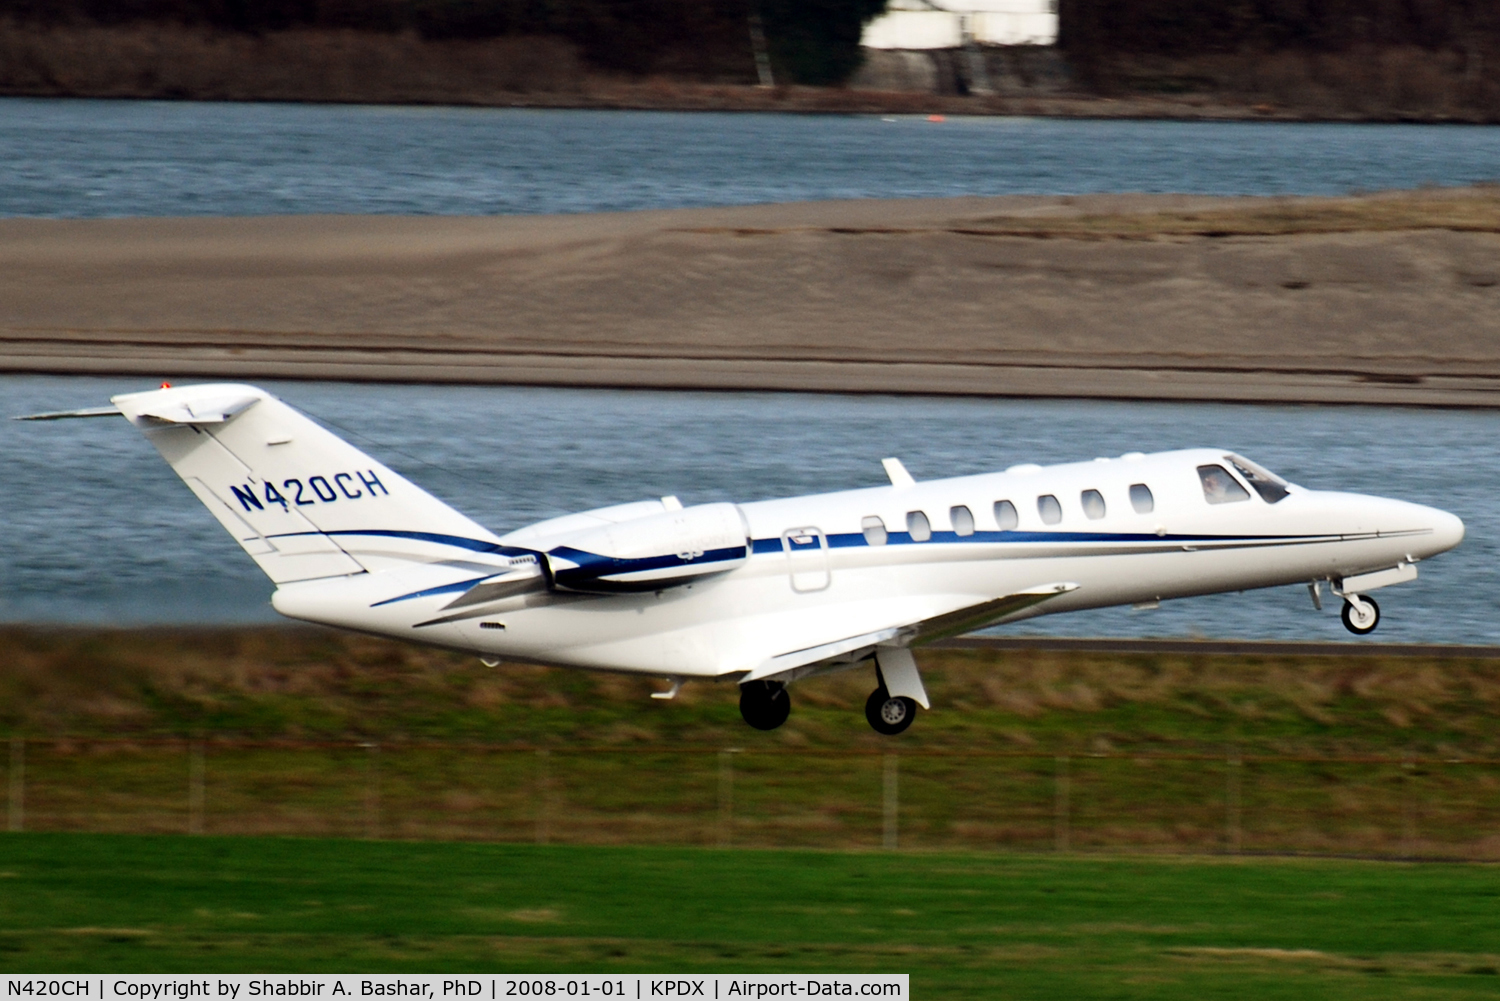 N420CH, 2007 Cessna 525B CitationJet Cj3 C/N 525B0151, Just after take off.  Parts of the Columbia river are seen in the background